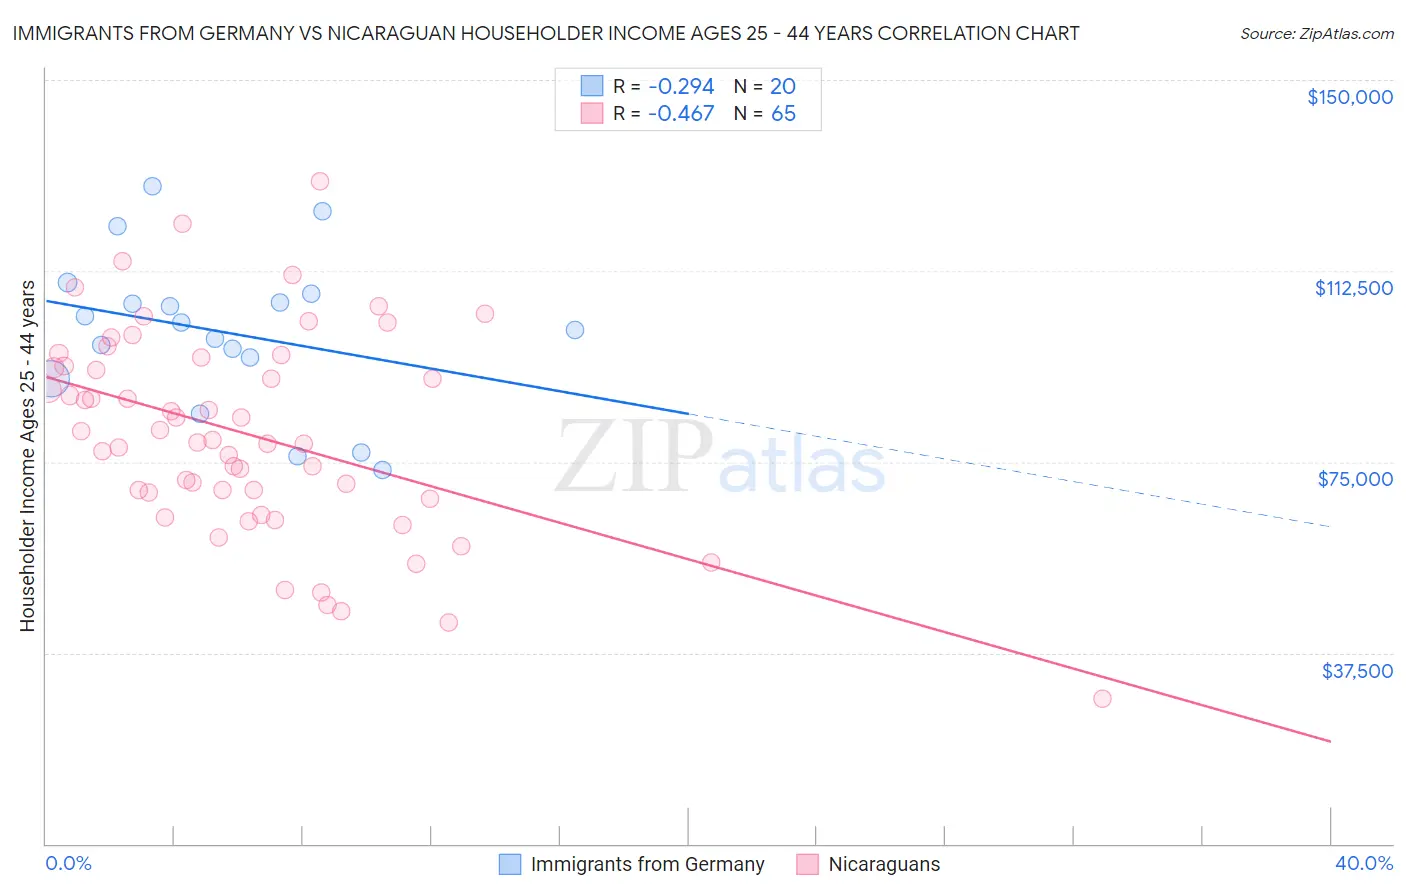 Immigrants from Germany vs Nicaraguan Householder Income Ages 25 - 44 years